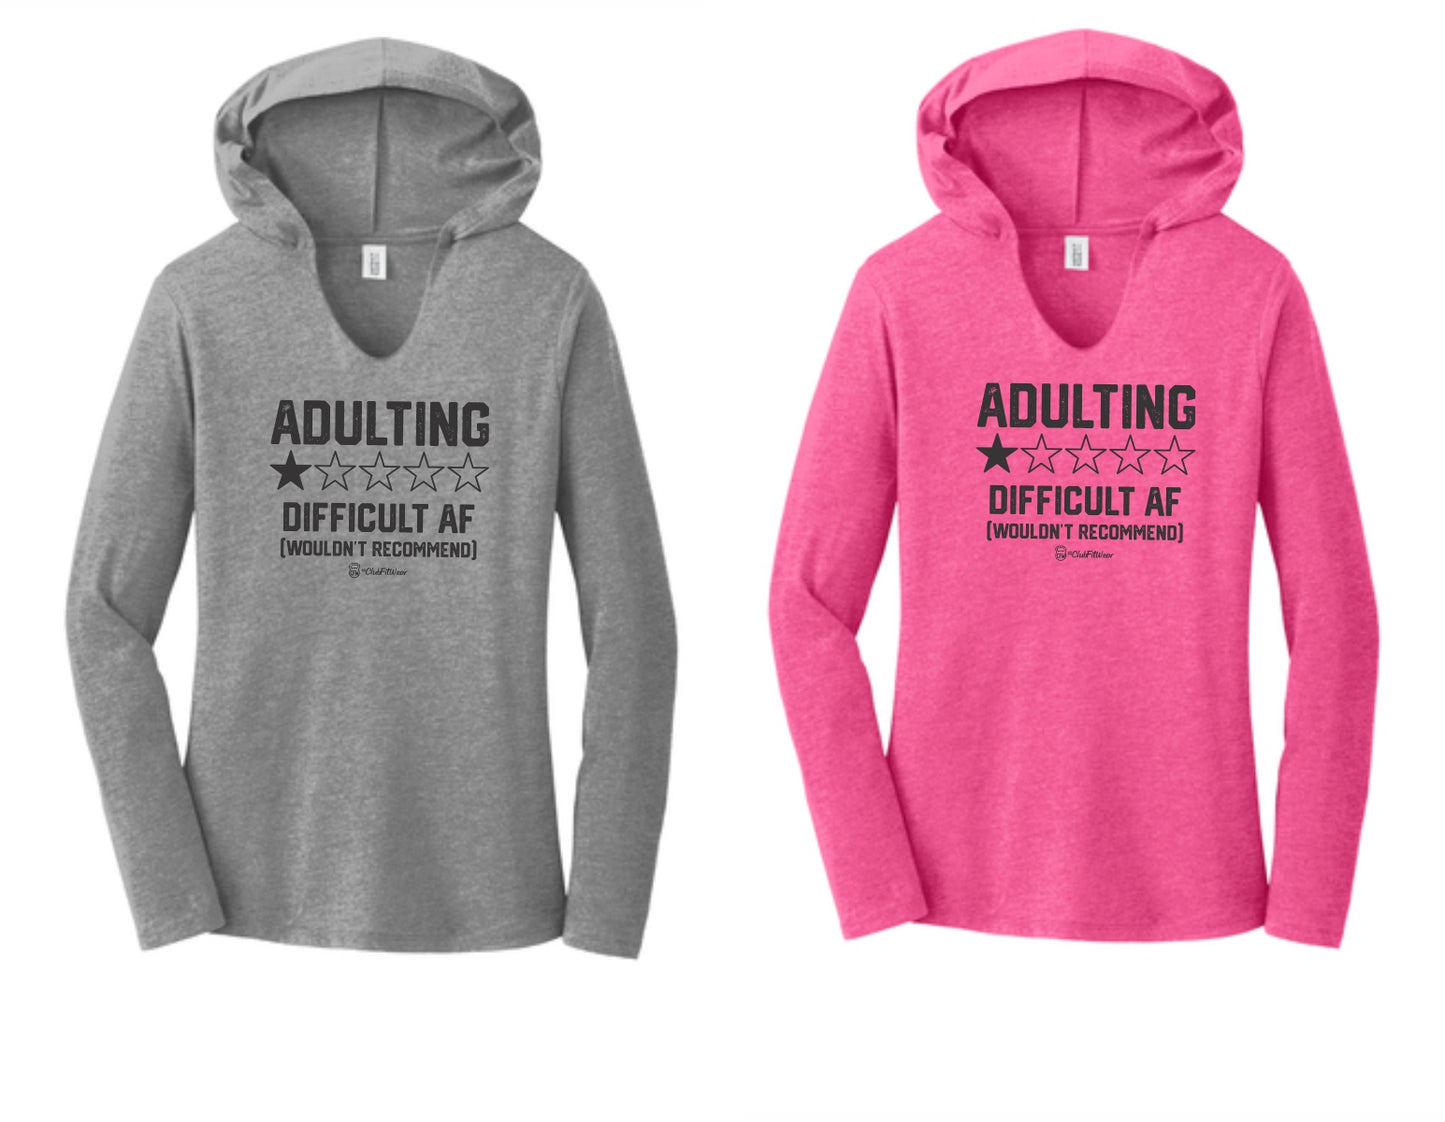 Adulting Difficult AF Wouldn't Recommend - Women's V-Neck Hooded Pullover